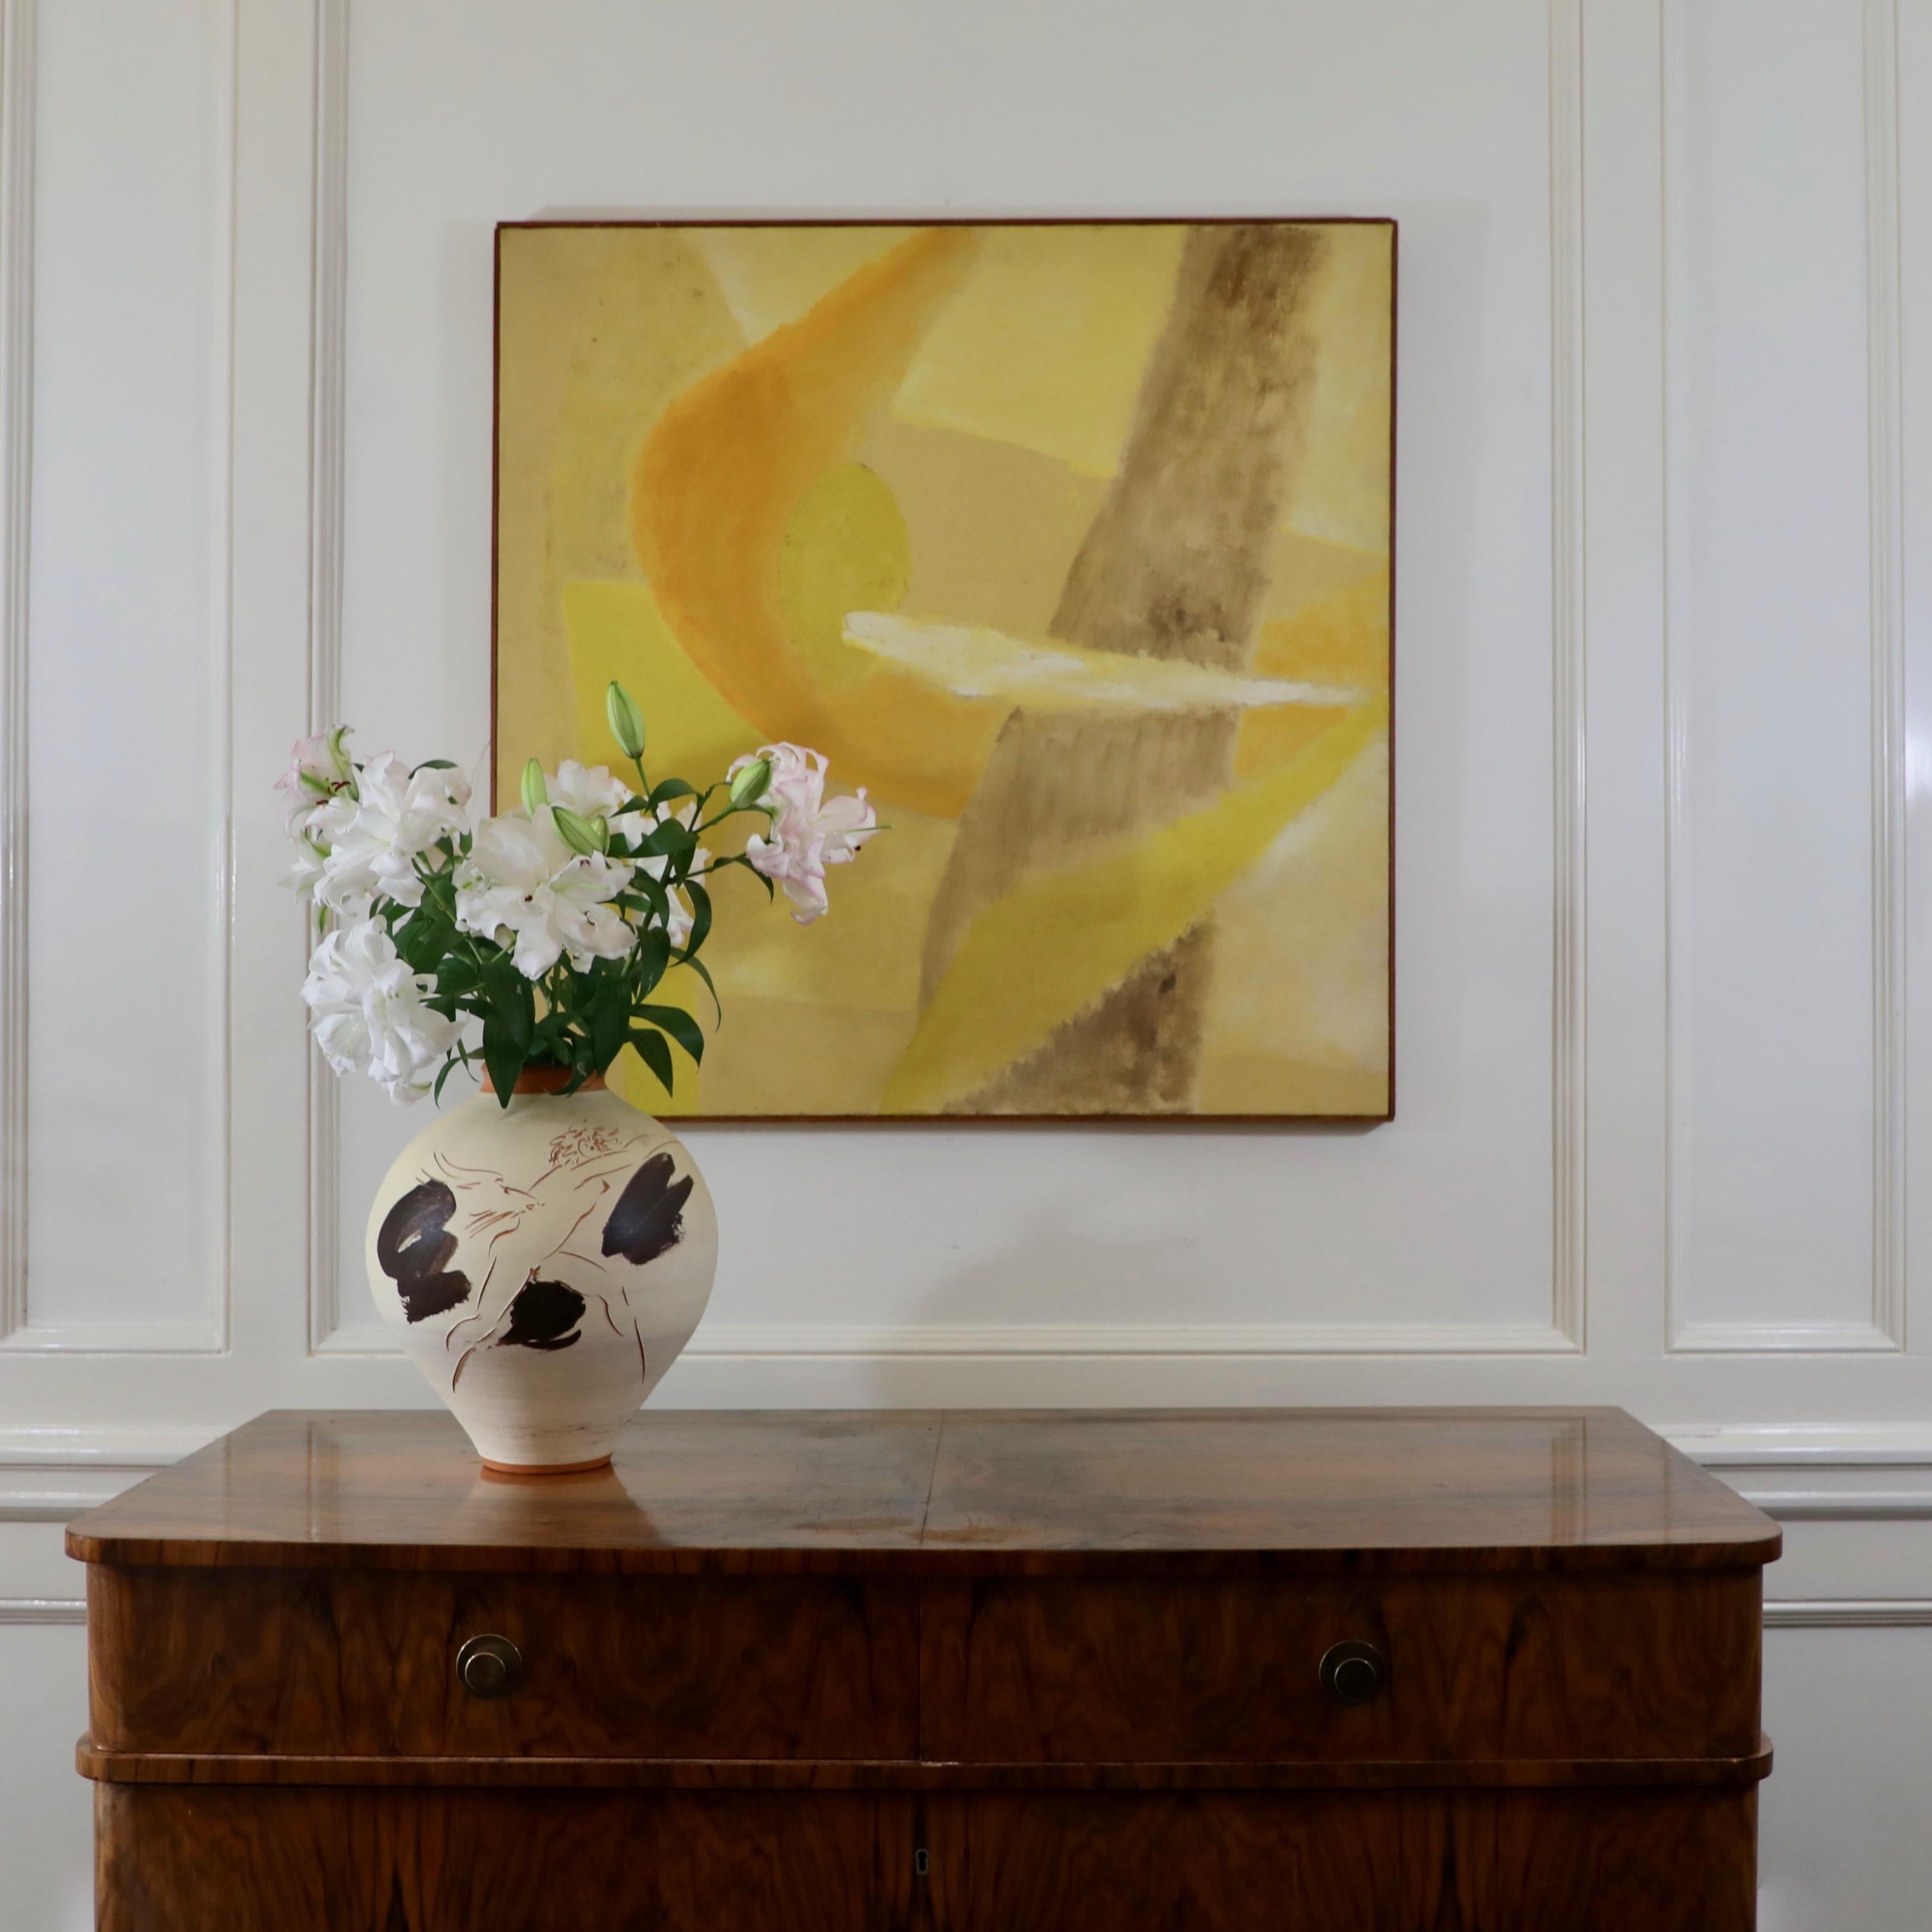 This is a mid century abstract oil on canvas in shades of yellow. It is large and impactful and really well done by the American artist Jacqueline Rozendaal Harvey. Completed in 1959 this work is really indicative of the 1950s abstract expressionist